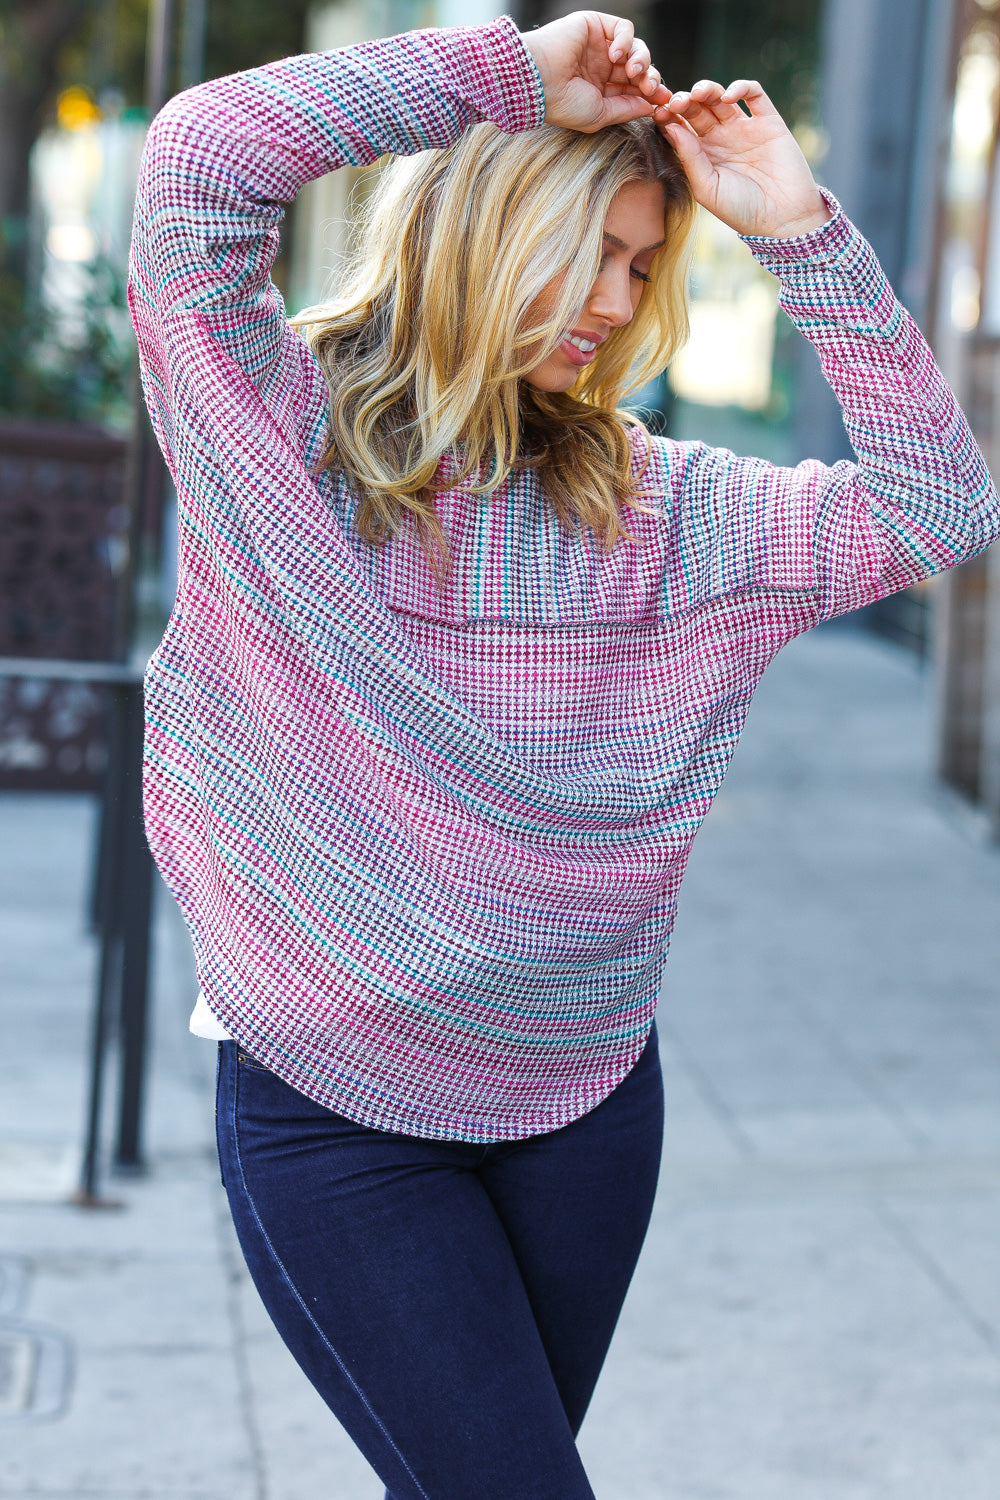 Class And Sass - Vintage Textured Top